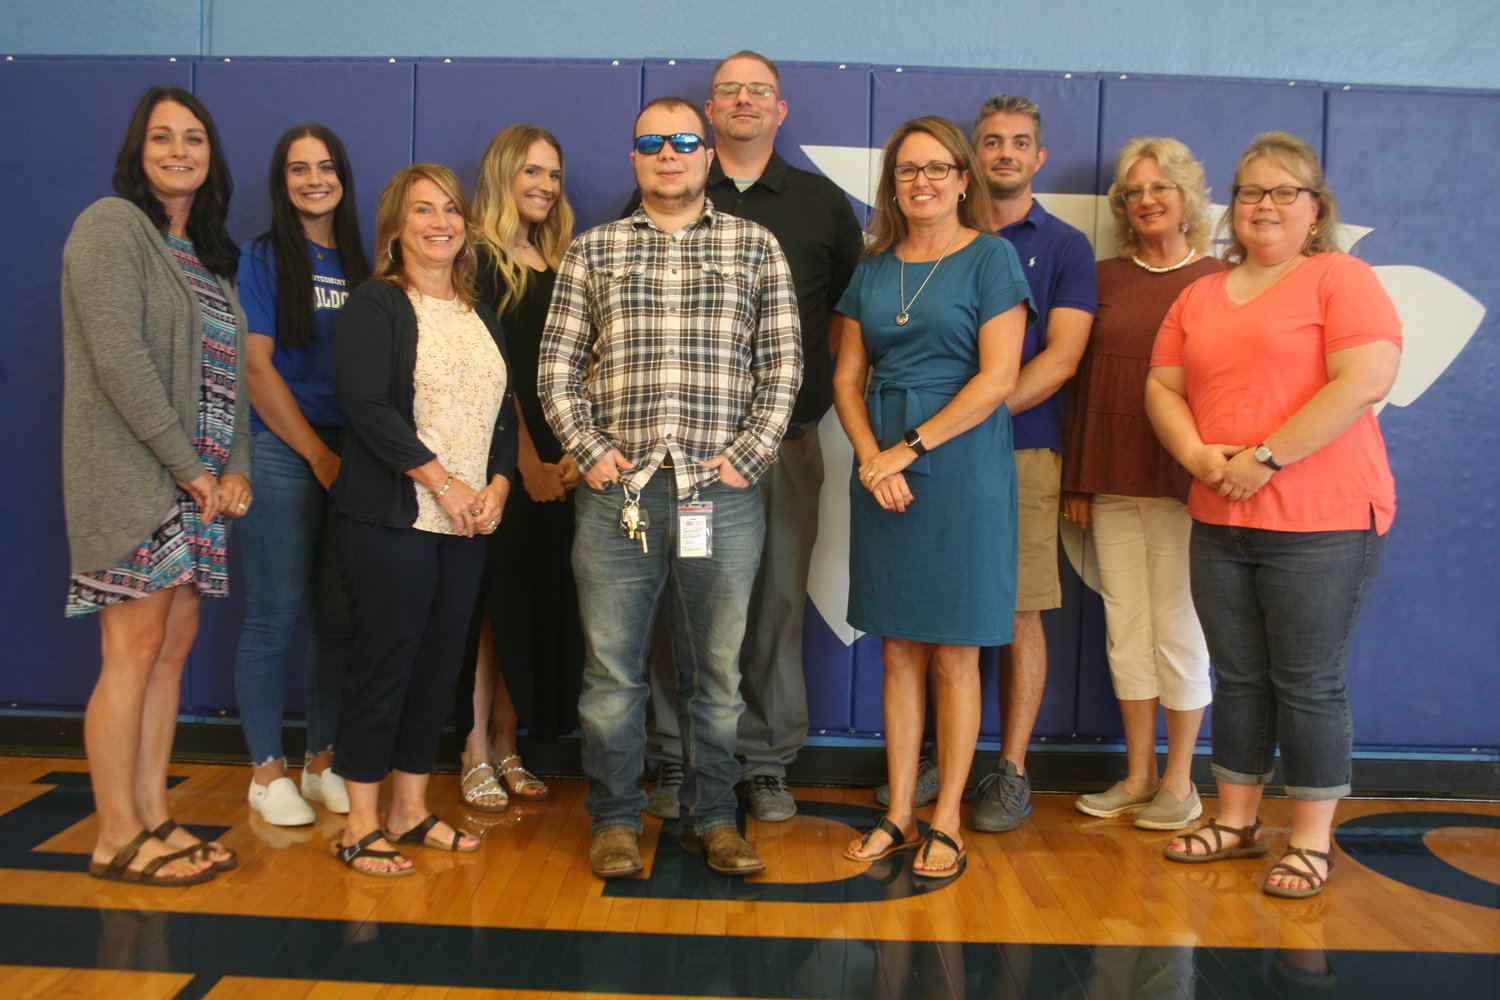 The Montgomery County R-II School District will have 10 new teachers for the 2022-23 school year. Pictured, front row from left, Jessica Eversmeyer, Leslie Henke, Garrett Gifford, Lori Farrar and Lindsey Duncan. Back row are Lexi Isaak, Eva Rasey, Kyle Schroer, George Coy Rollins IV and Lynnette Gray.